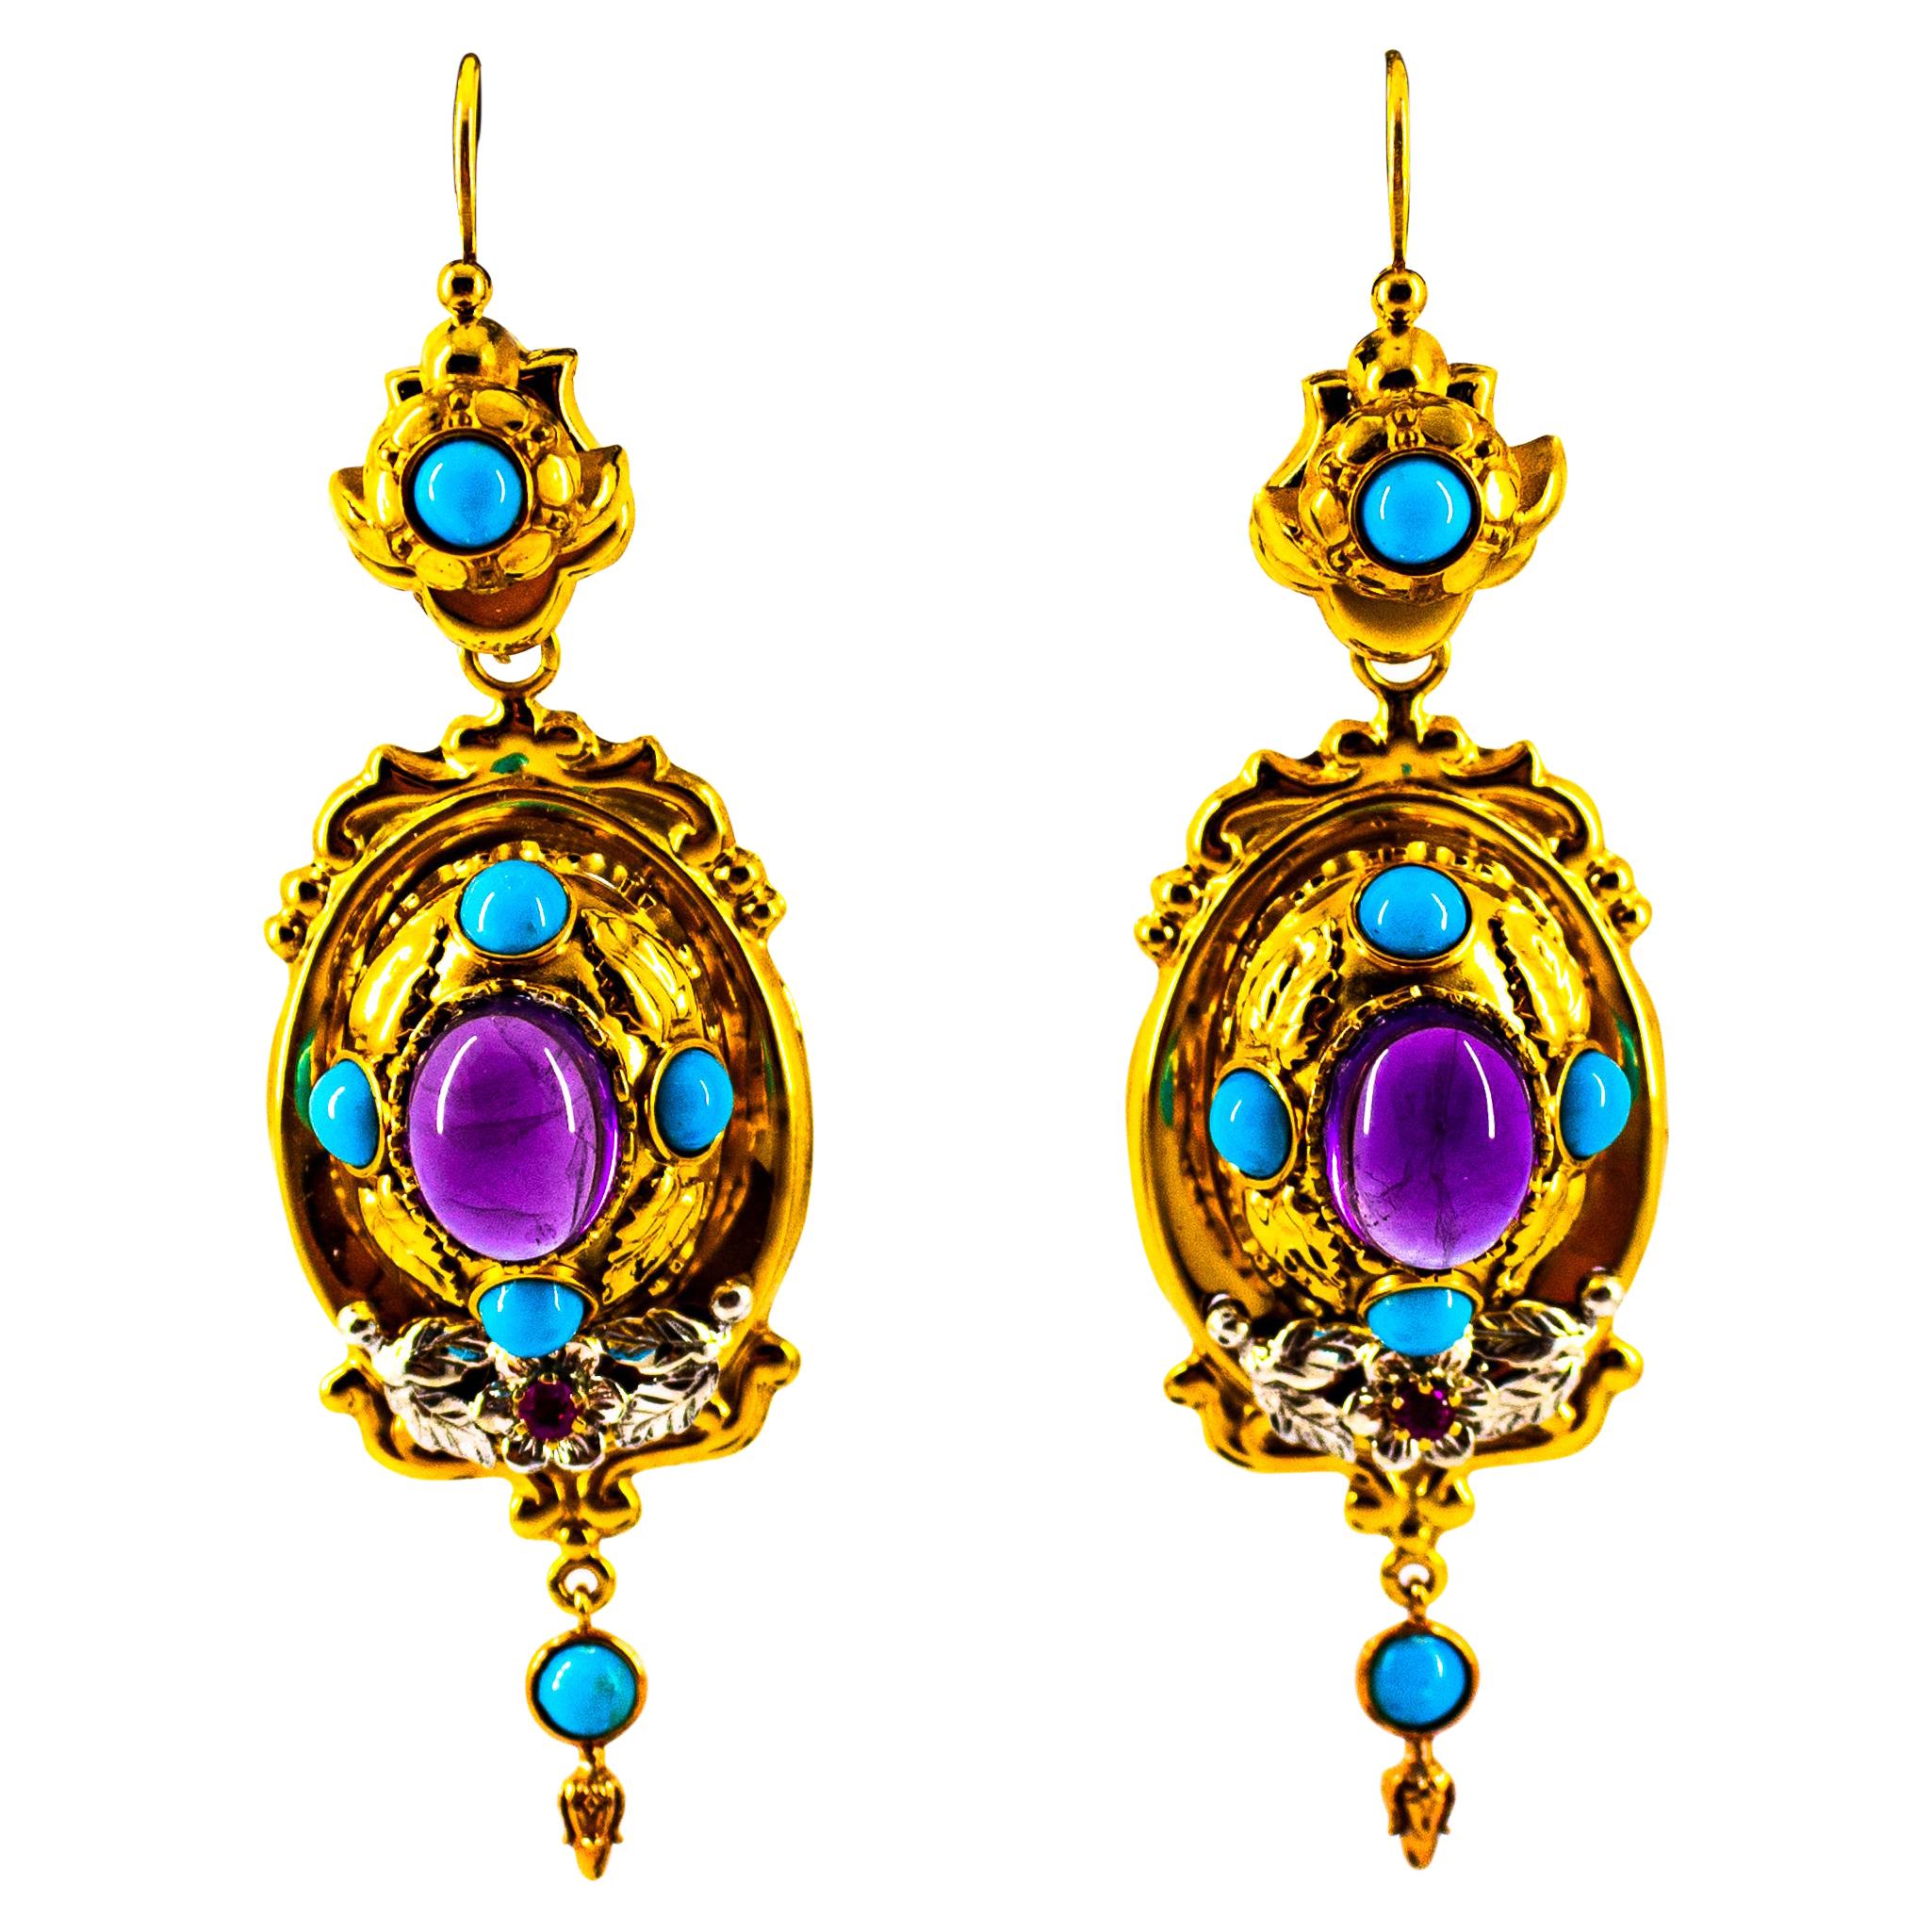 Art Deco Style 5.60 Carat Ruby Amethyst Turquoise Yellow Gold Drop Stud Earrings